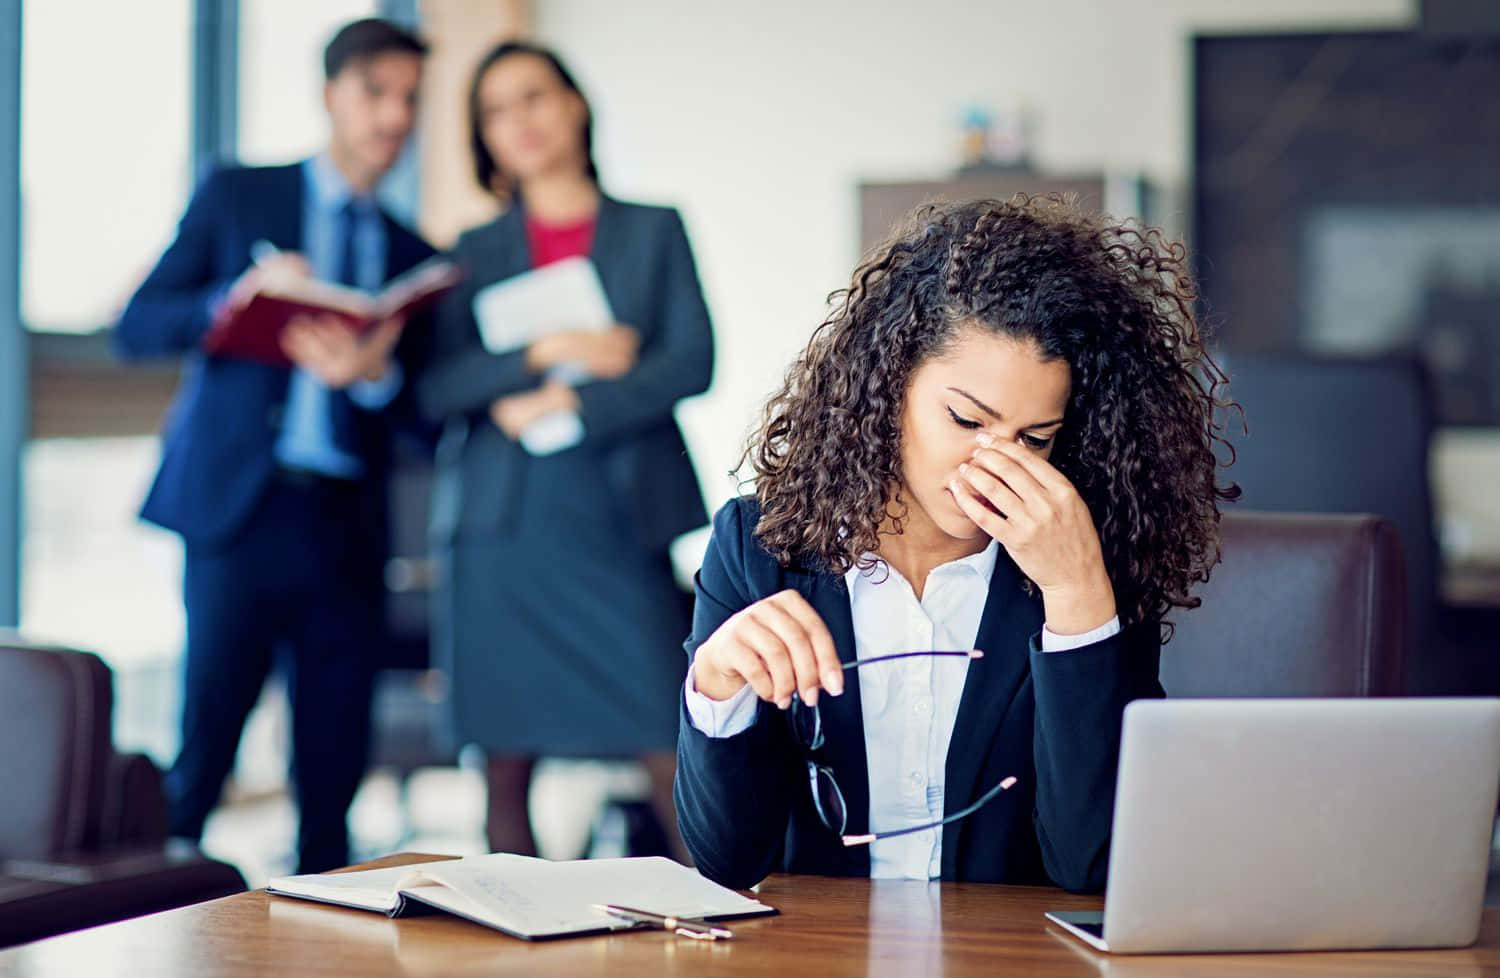 A Woman In A Business Suit Is Crying In Front Of A Group Of People Wallpaper